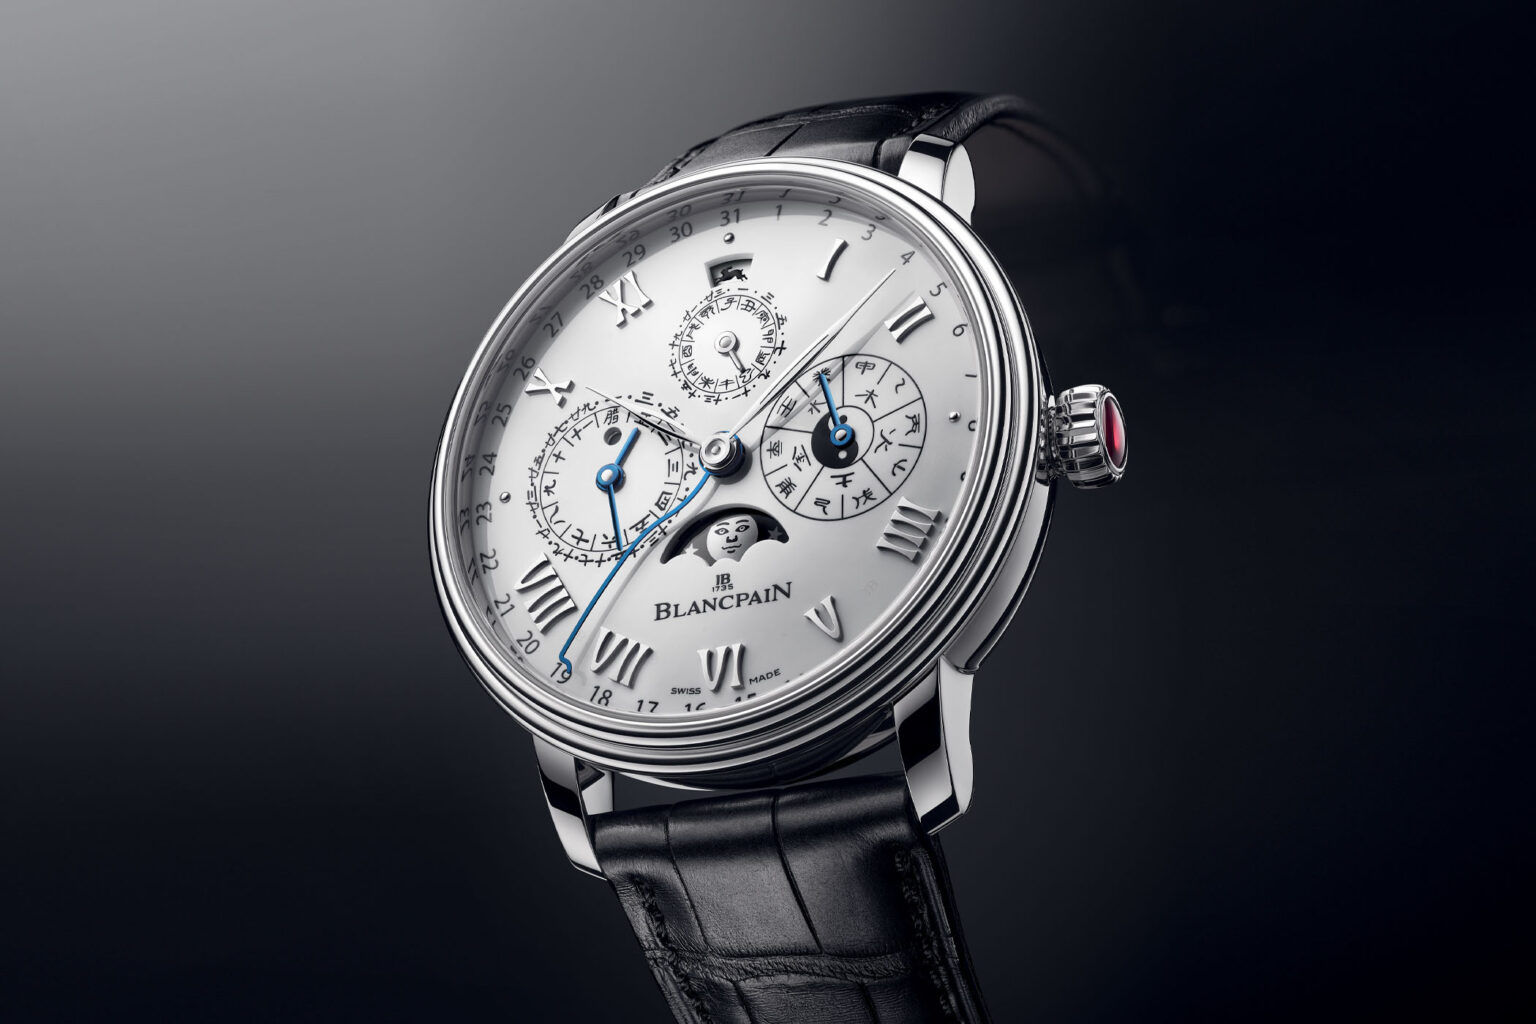 Blancpain Villeret Traditional Chinese Calendar year of the water Rabbit watch.